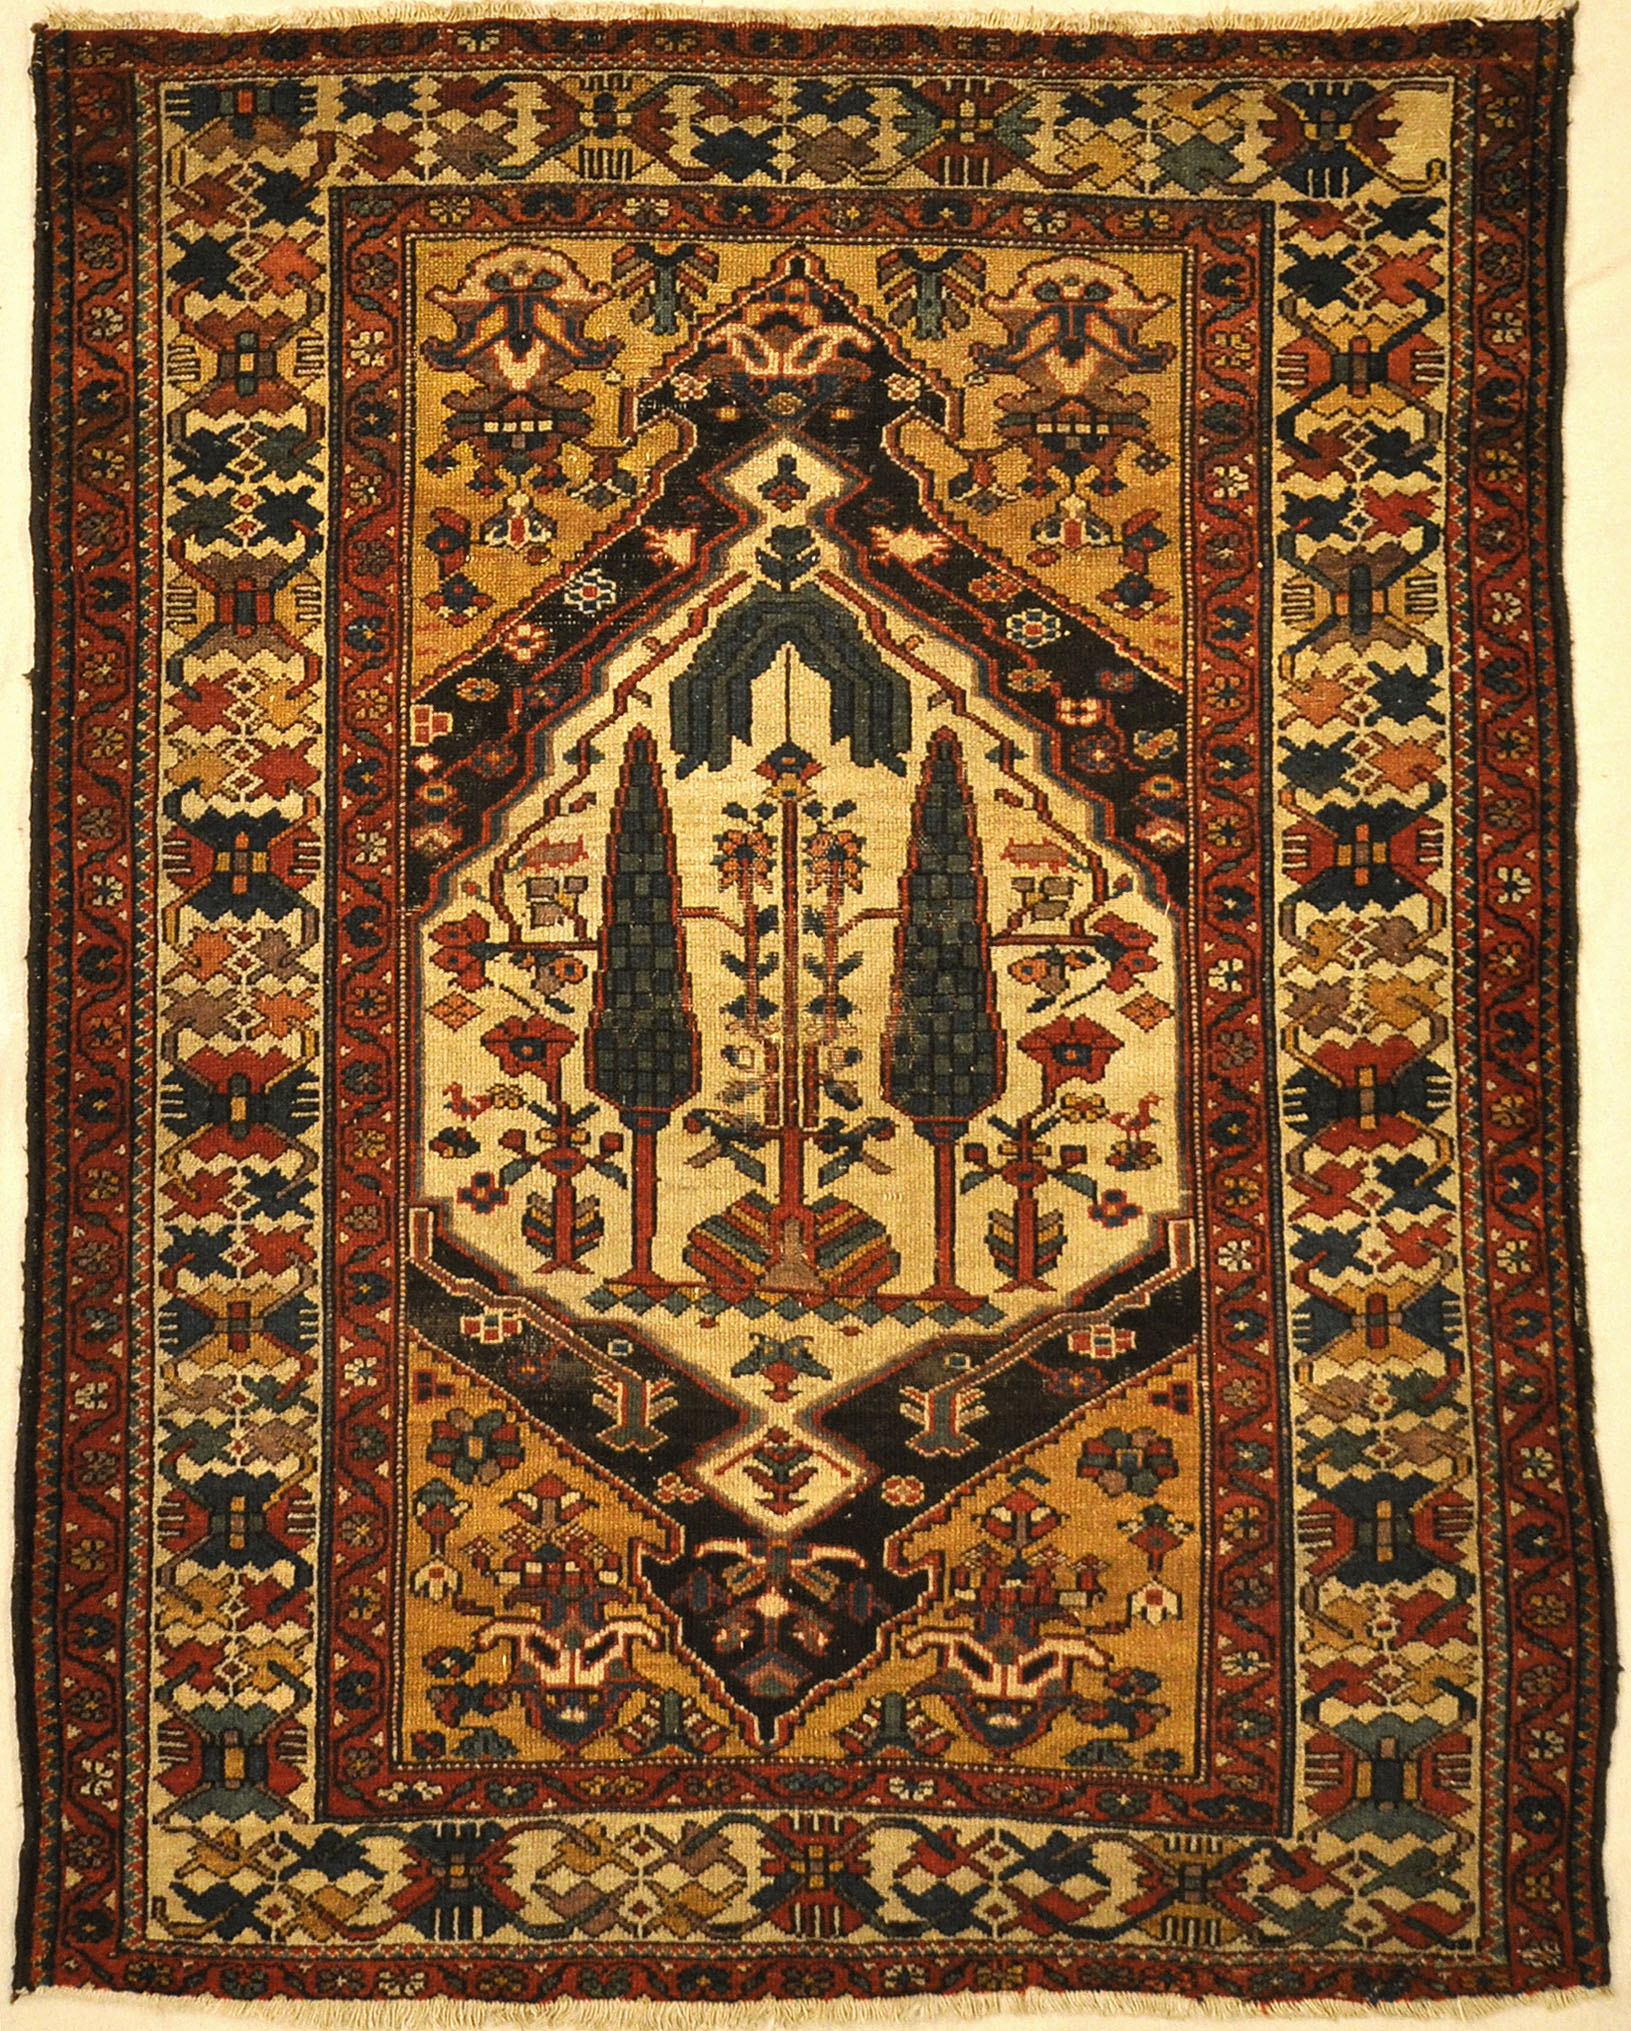 Rare Baktiari Rug Woven by Armenians feat. Cypress and Weeping Willow Trees. A piece of genuine antique woven carpet art sold by Santa Barbara Design Center